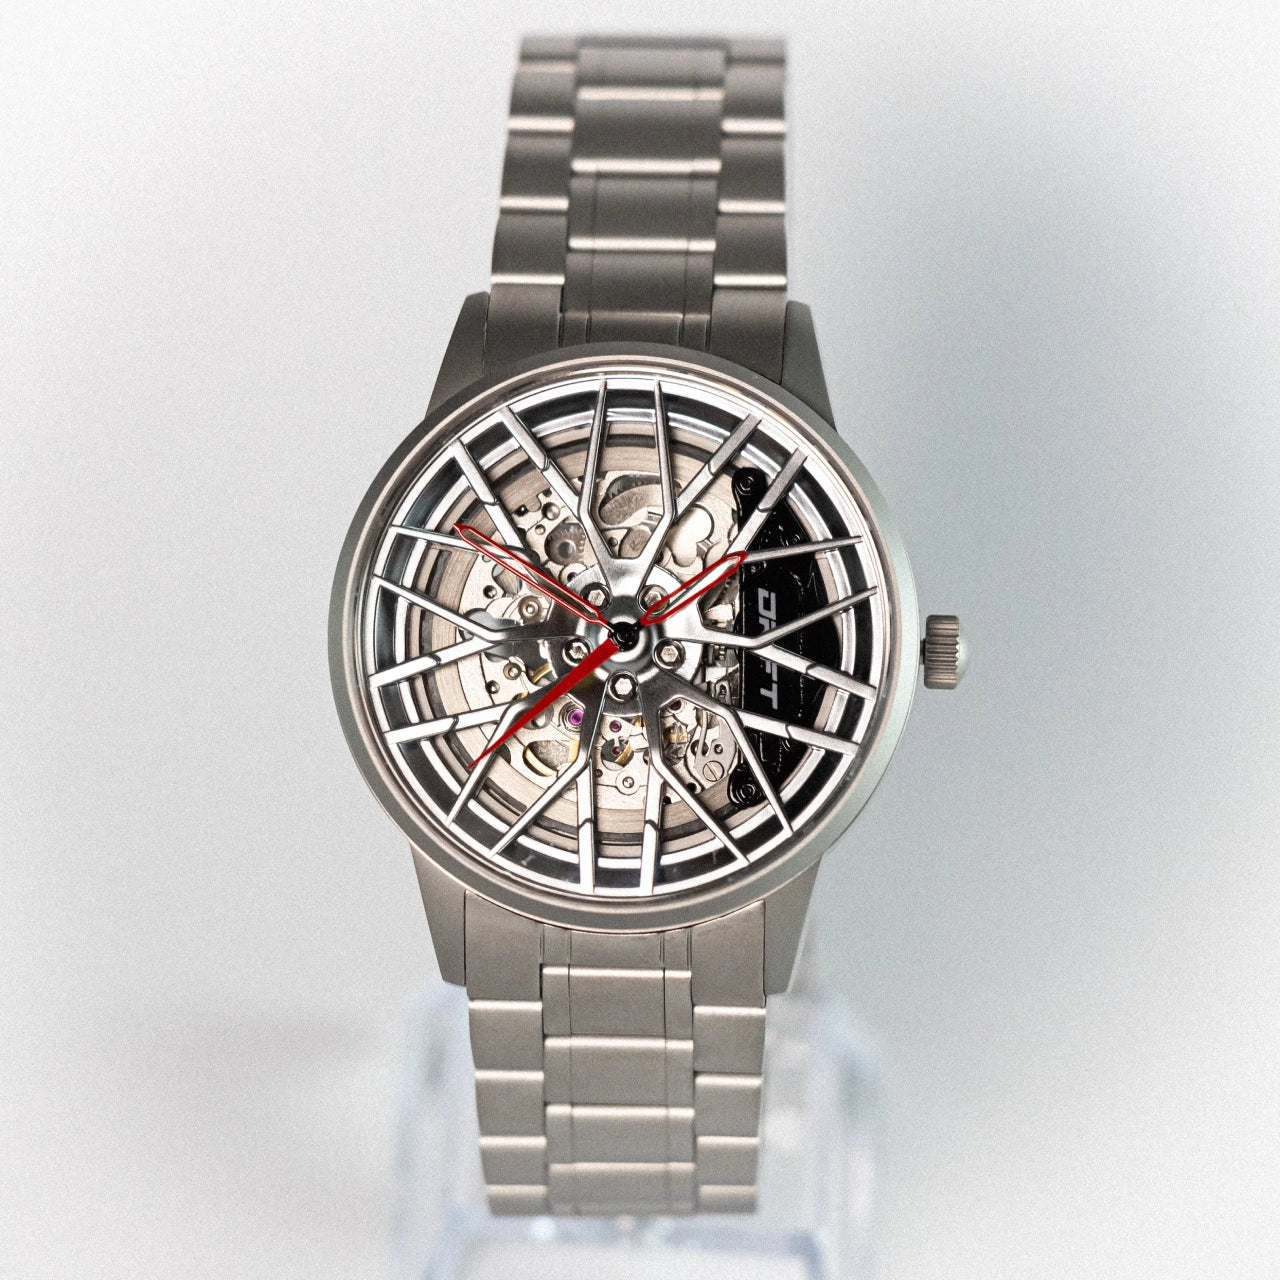 The image displays an Automatic Motorsport EMS Edition wristwatch. The watch features a unique wheel rim design, symbolizing DriftElement's innovative approach to timepieces. The metallic structure, visible gears, and the striking contrast of silver and red accents exemplify the creative fusion of horology and automotive design. DriftElement is a German startup known for such distinctive watches.